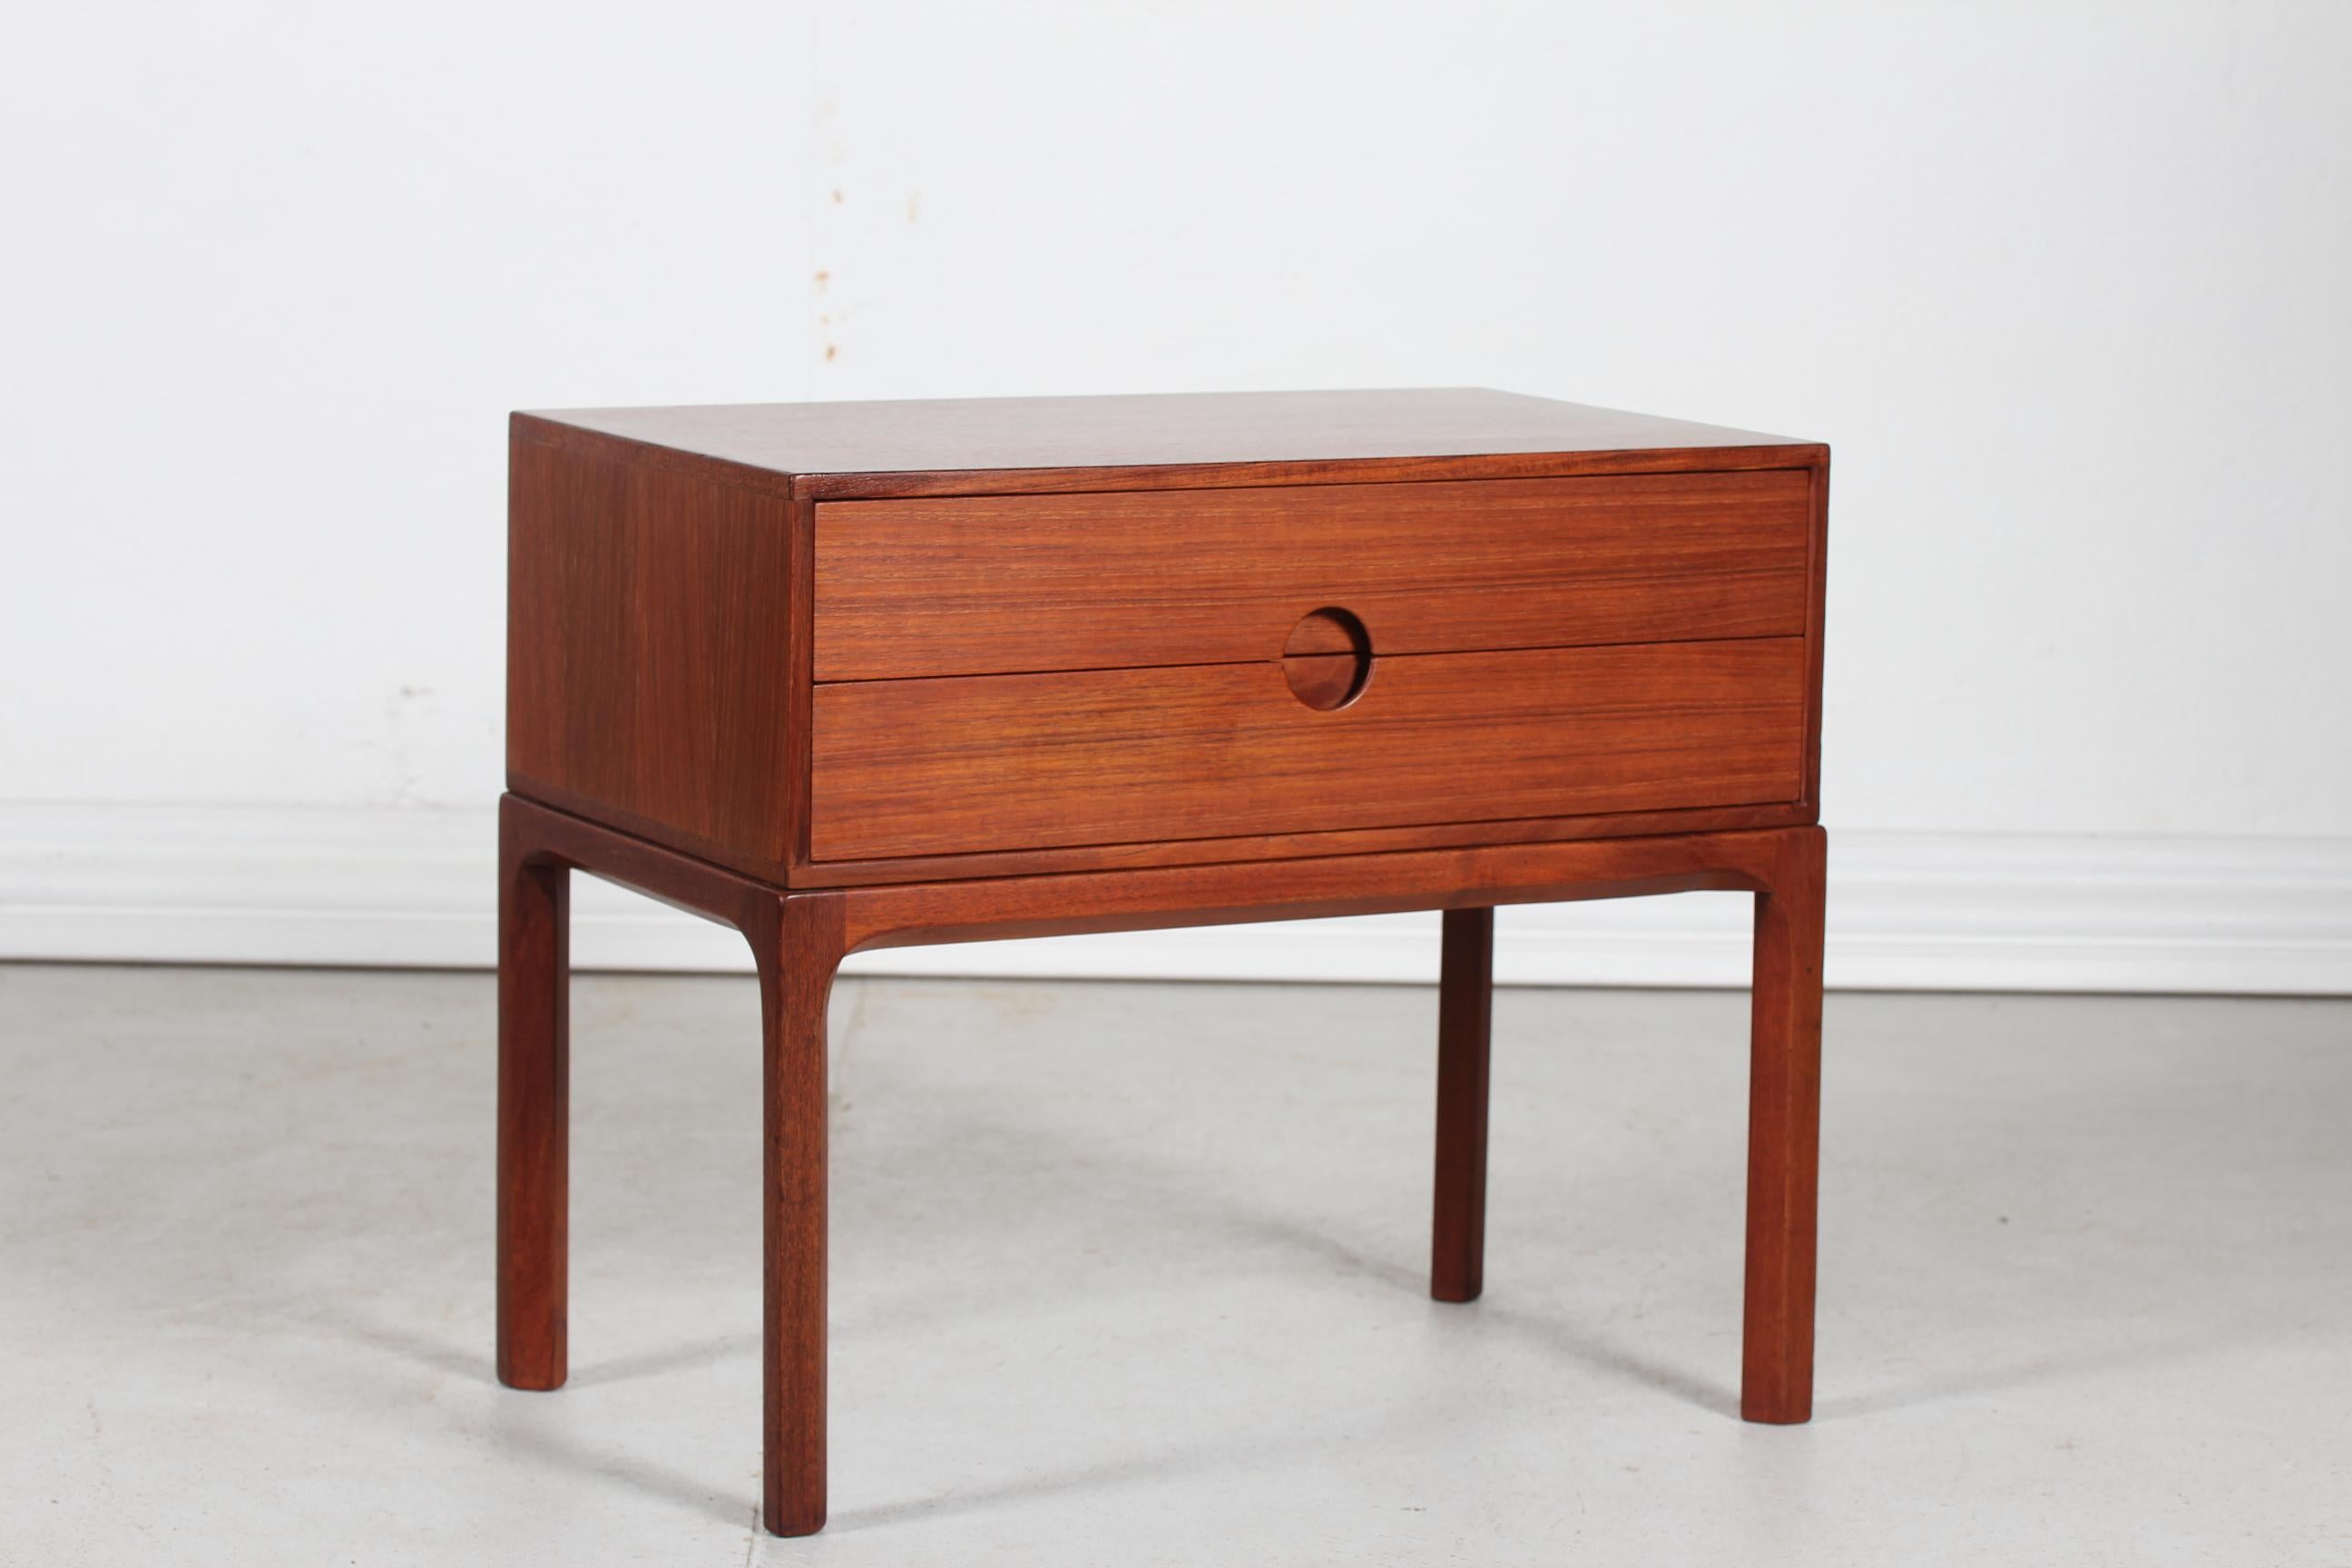 Original vintage dresser with 2 drawers model no. 384 made of teak with oil treatment, designed by Danish Aksel Kjersgaard (1925-2018) in the 1960´s.
It's manufactured by Aksel Kjersgaards own workshop in Odder in Denmark in the 1960´s.
This dresser